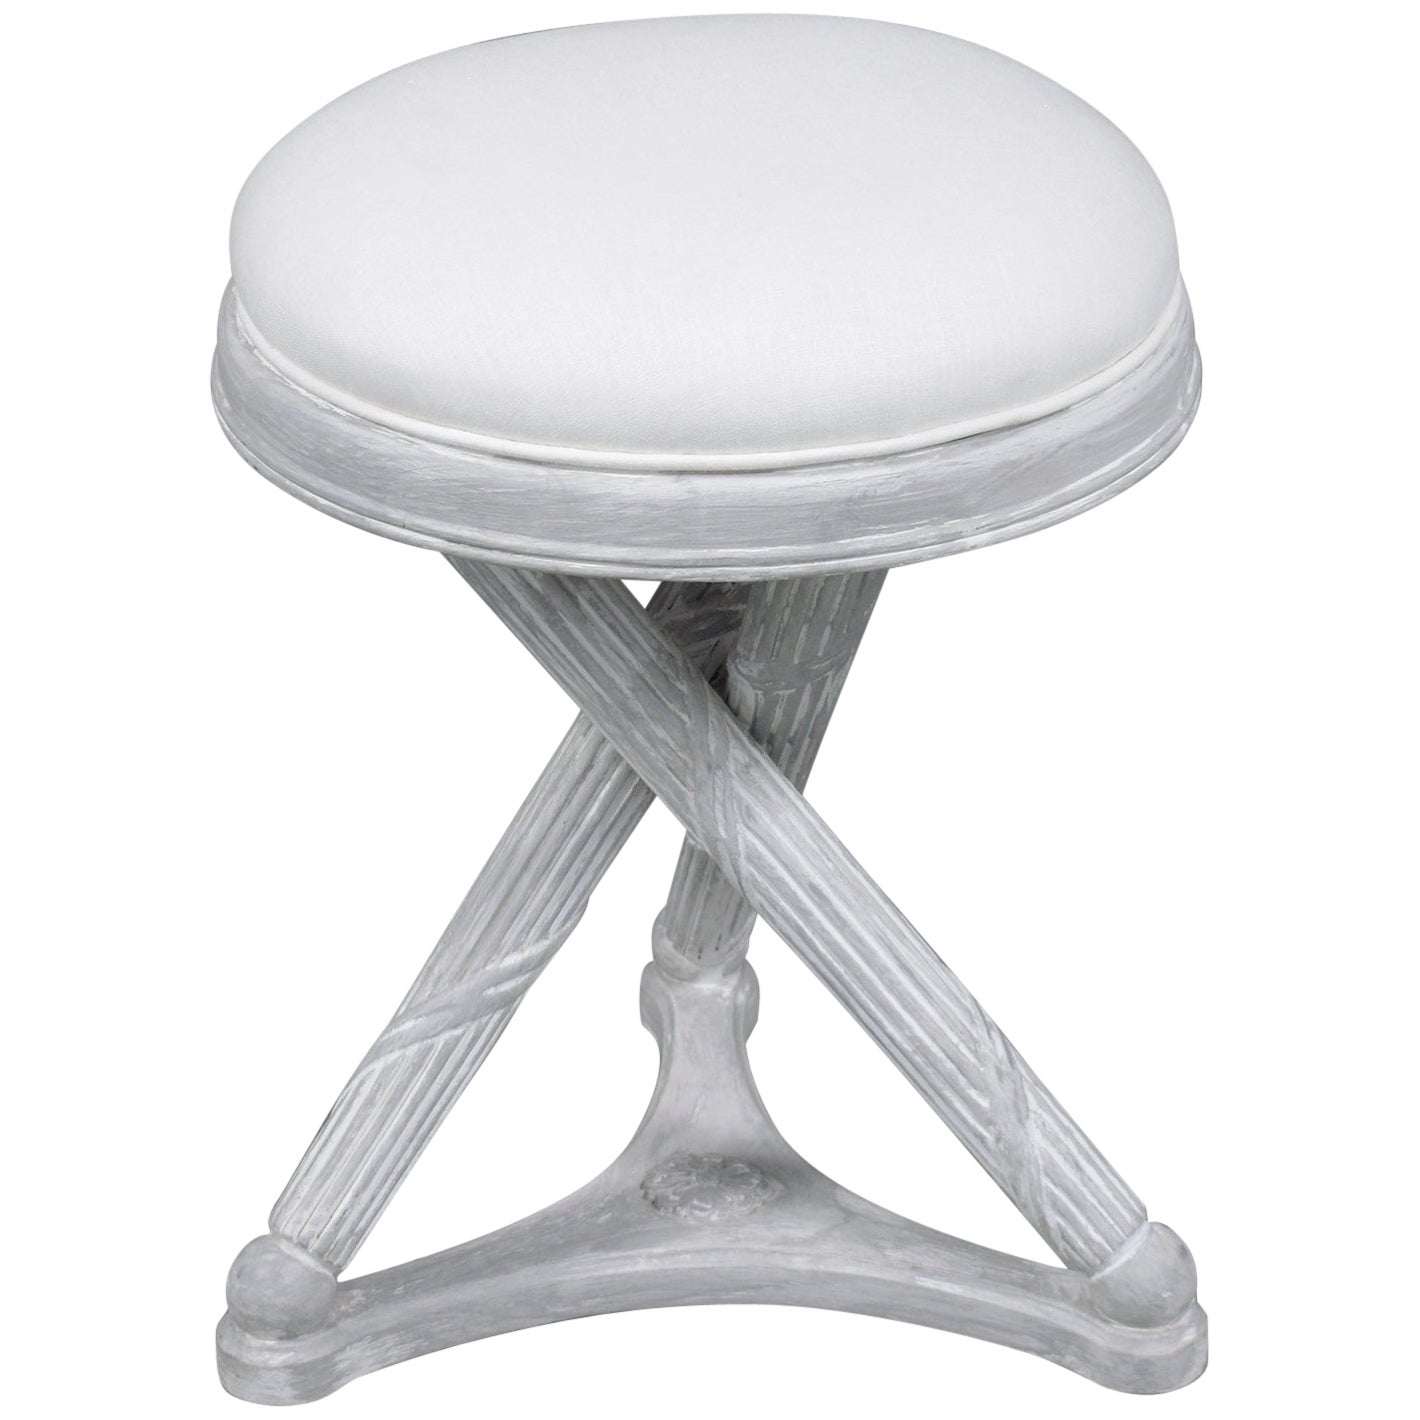 Restored Mid-Century Modern X-Base Stool in White & Gray with Linen Cushion For Sale